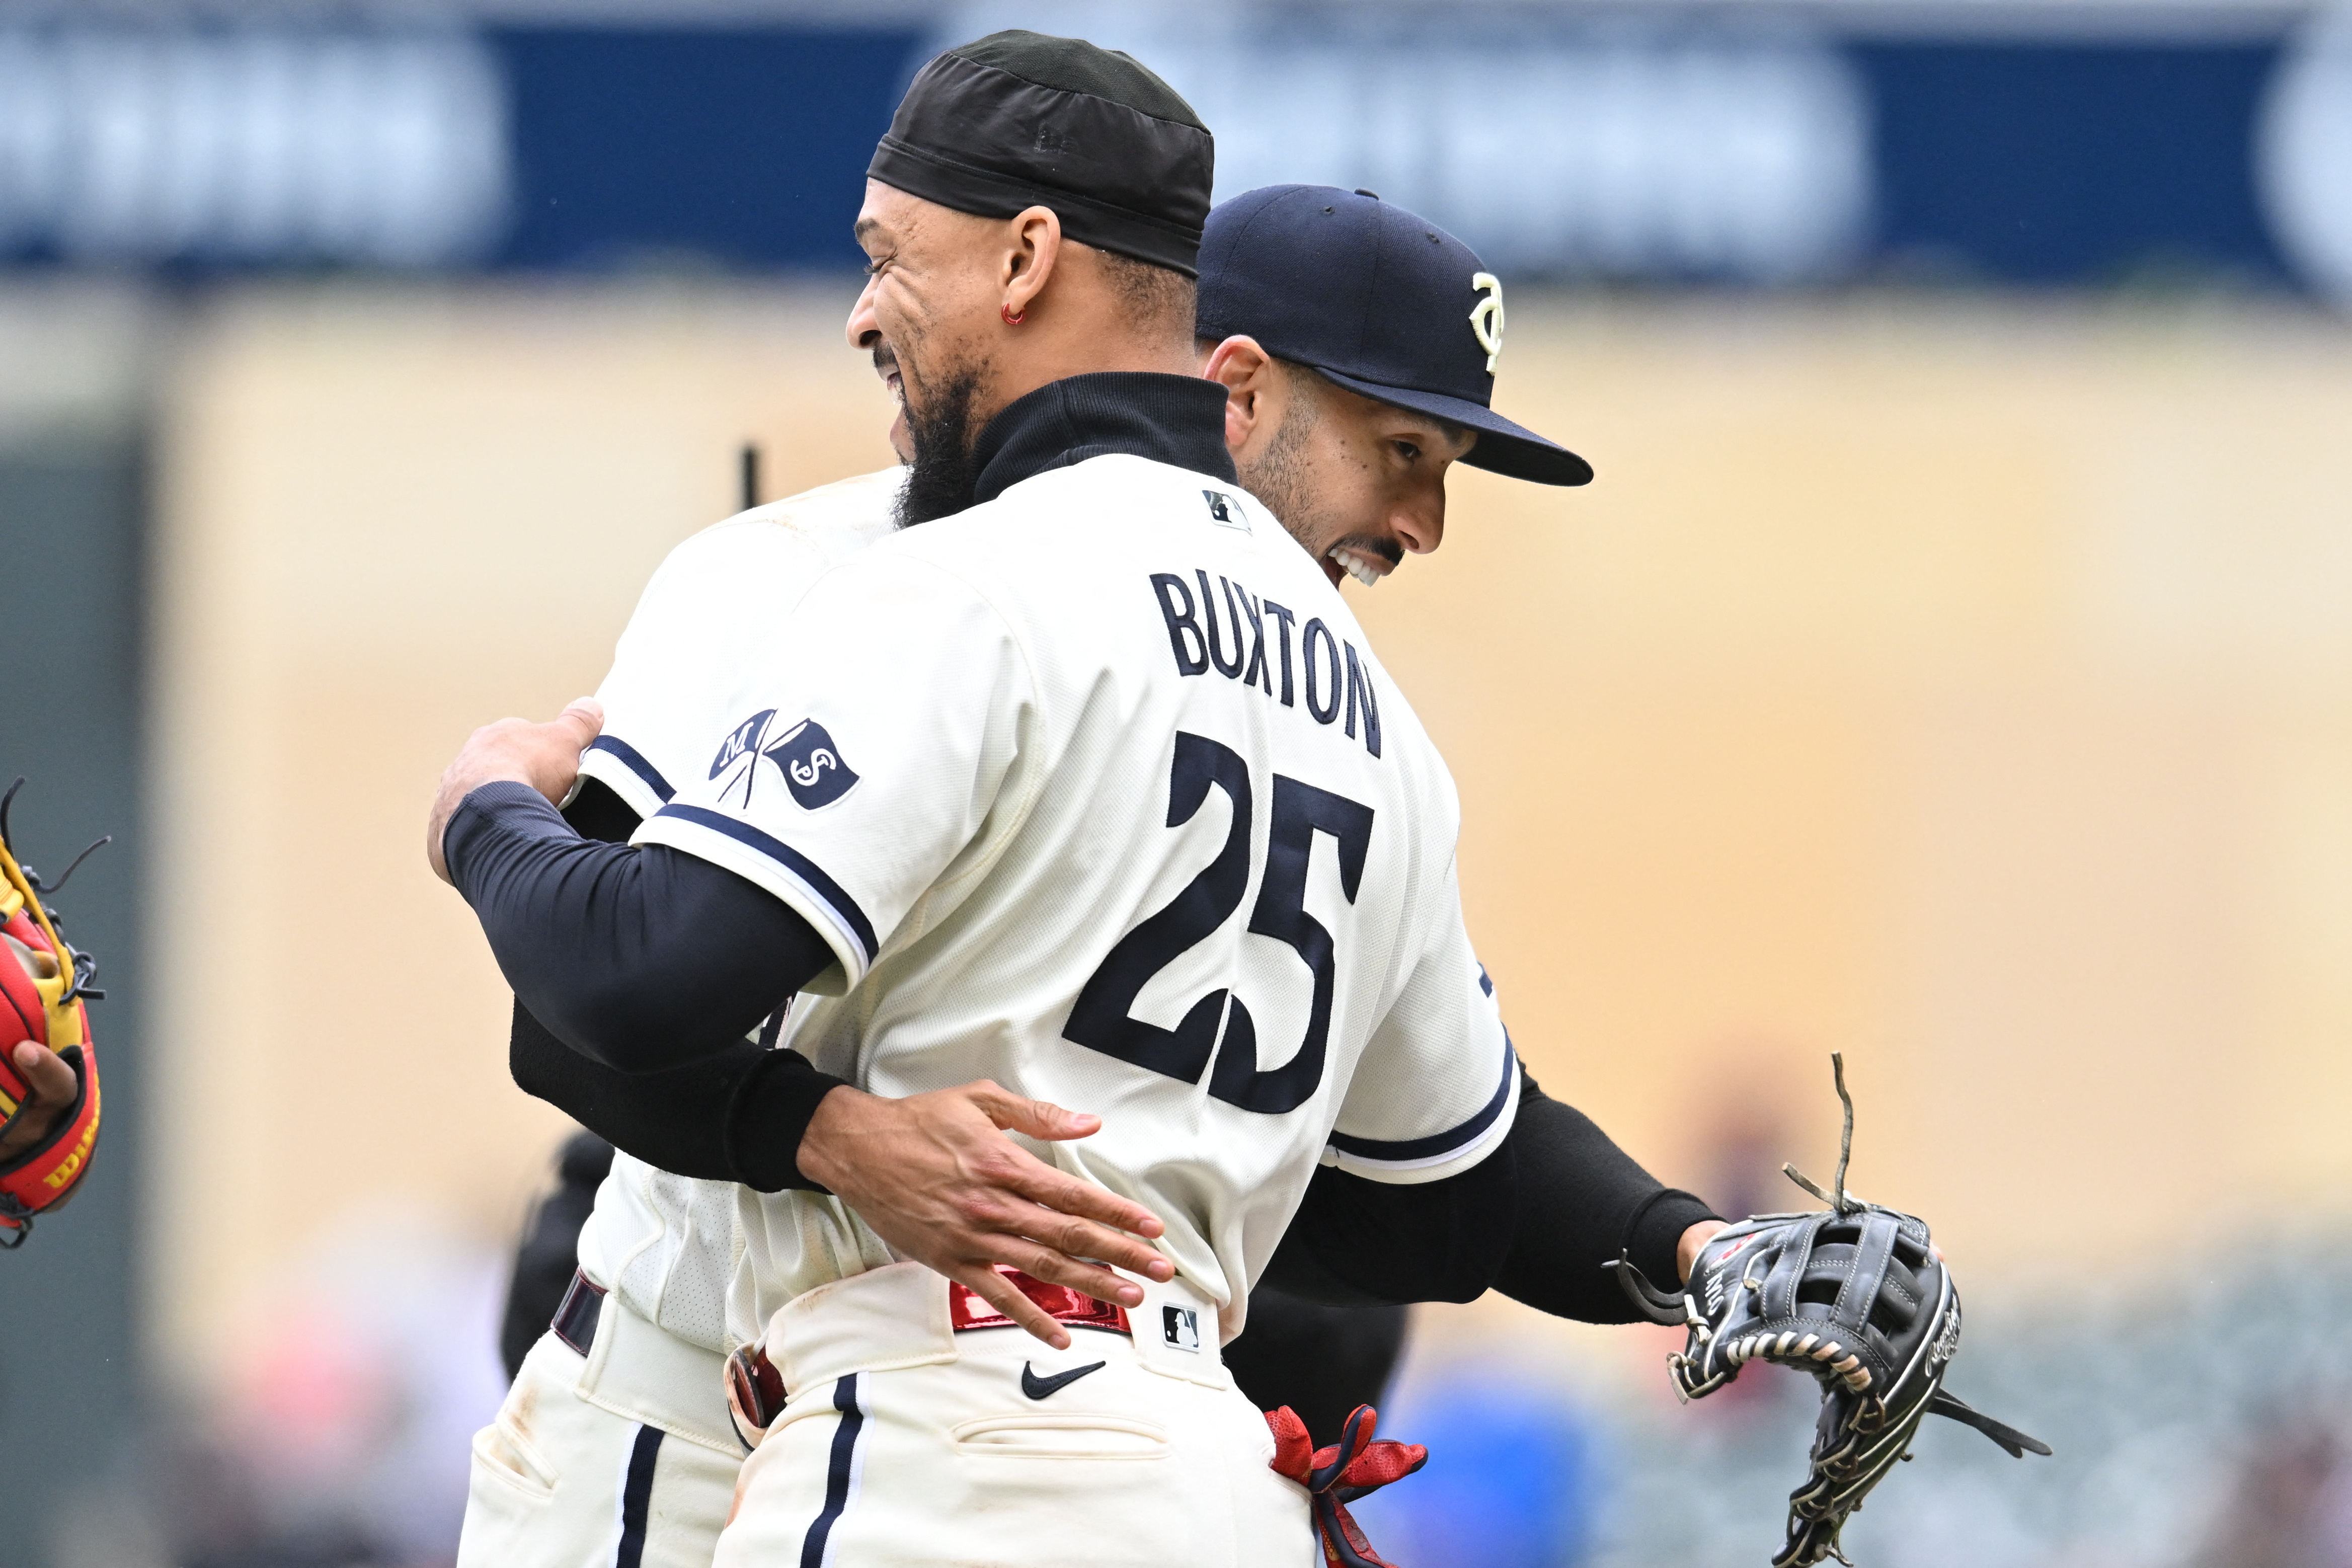 Buxton homer, Gray's 6 innings push Twins over Royals 8-4